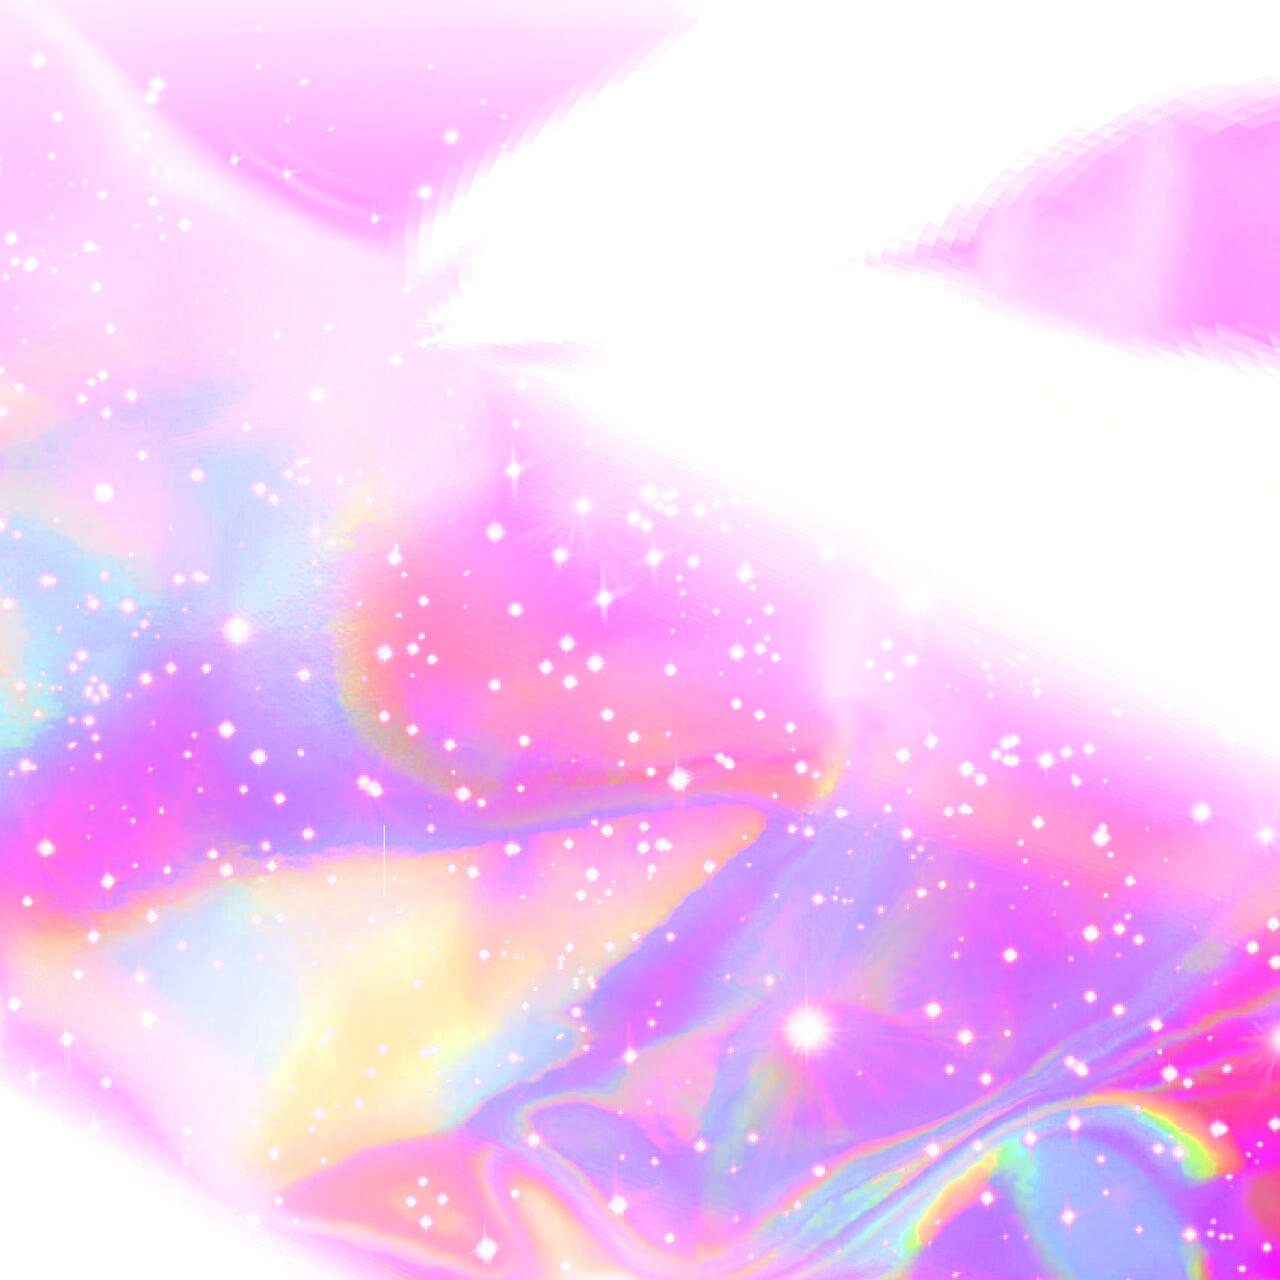 iridiana's profile picture across social platforms. primarily pink tones with a holographic rainbow overlay and bright stars that look like glitter.